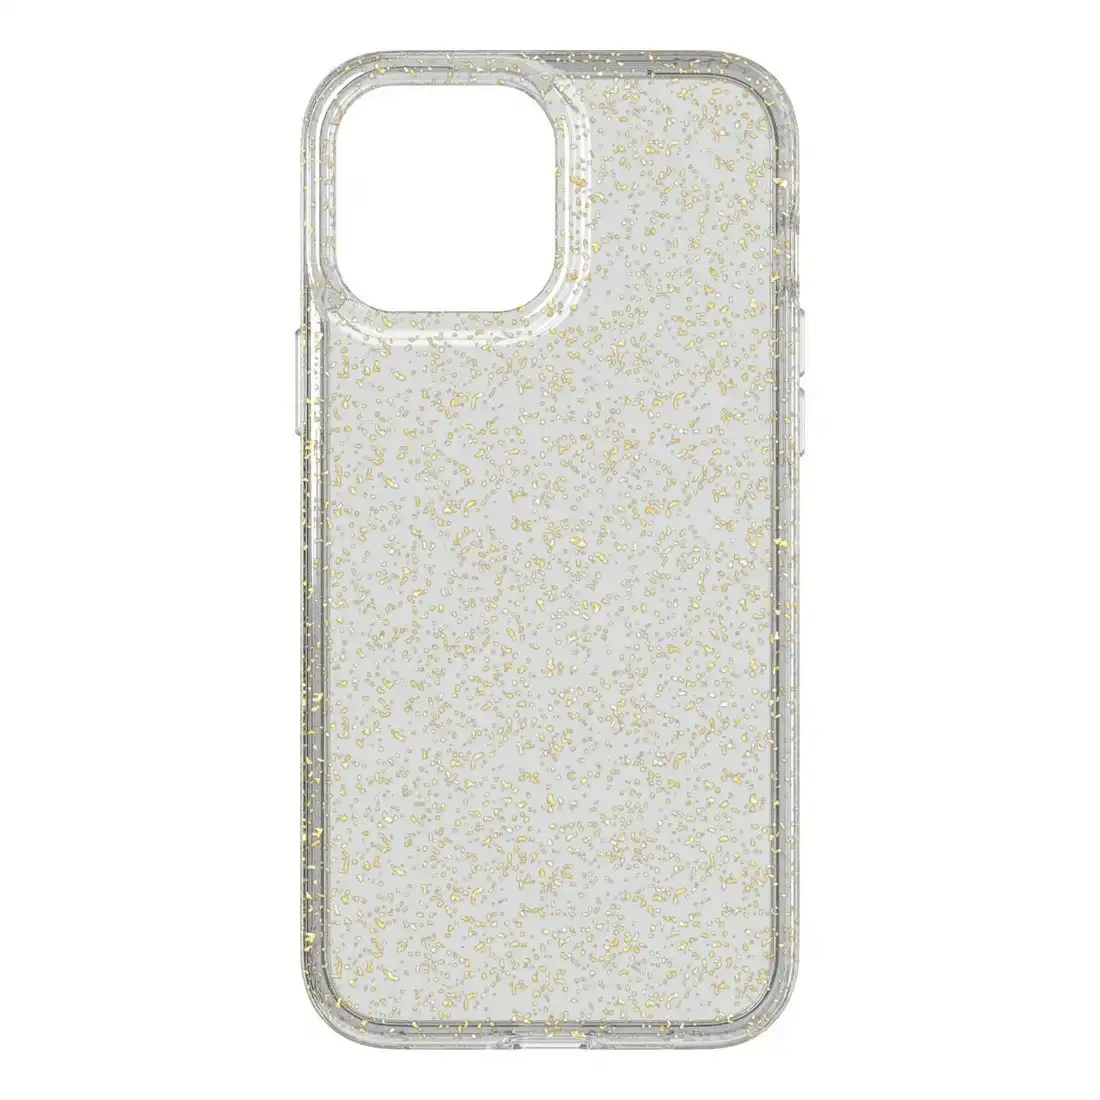 Tech21 Evo Sparkle Case for iPhone 13 T21-8953 - Gold